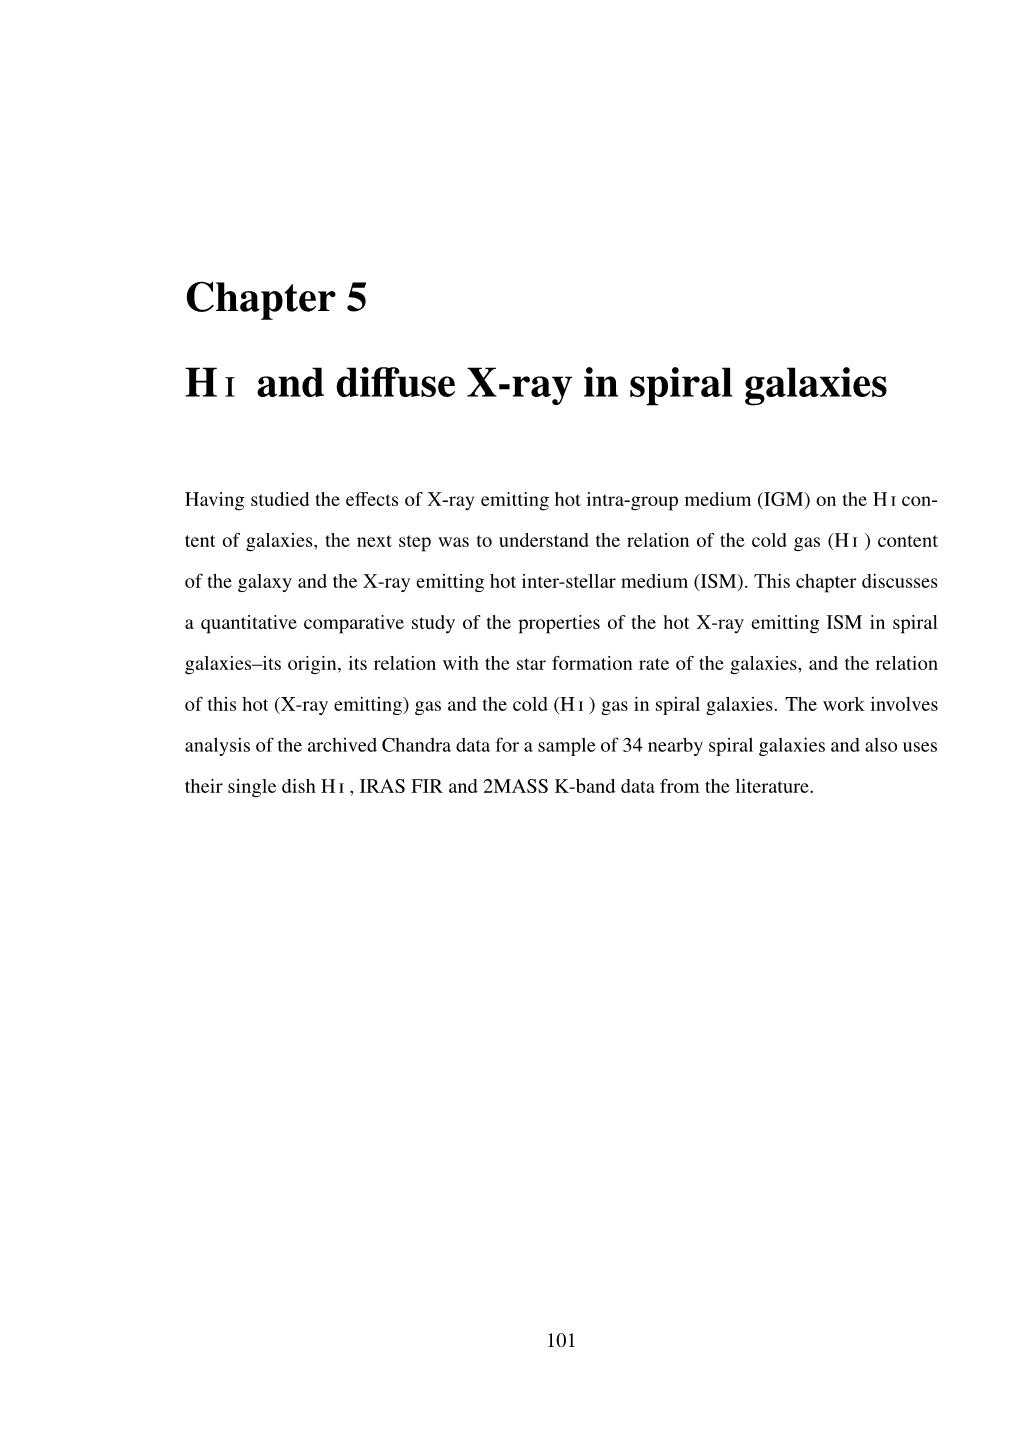 Chapter 5 Hi and Diffuse X-Ray in Spiral Galaxies